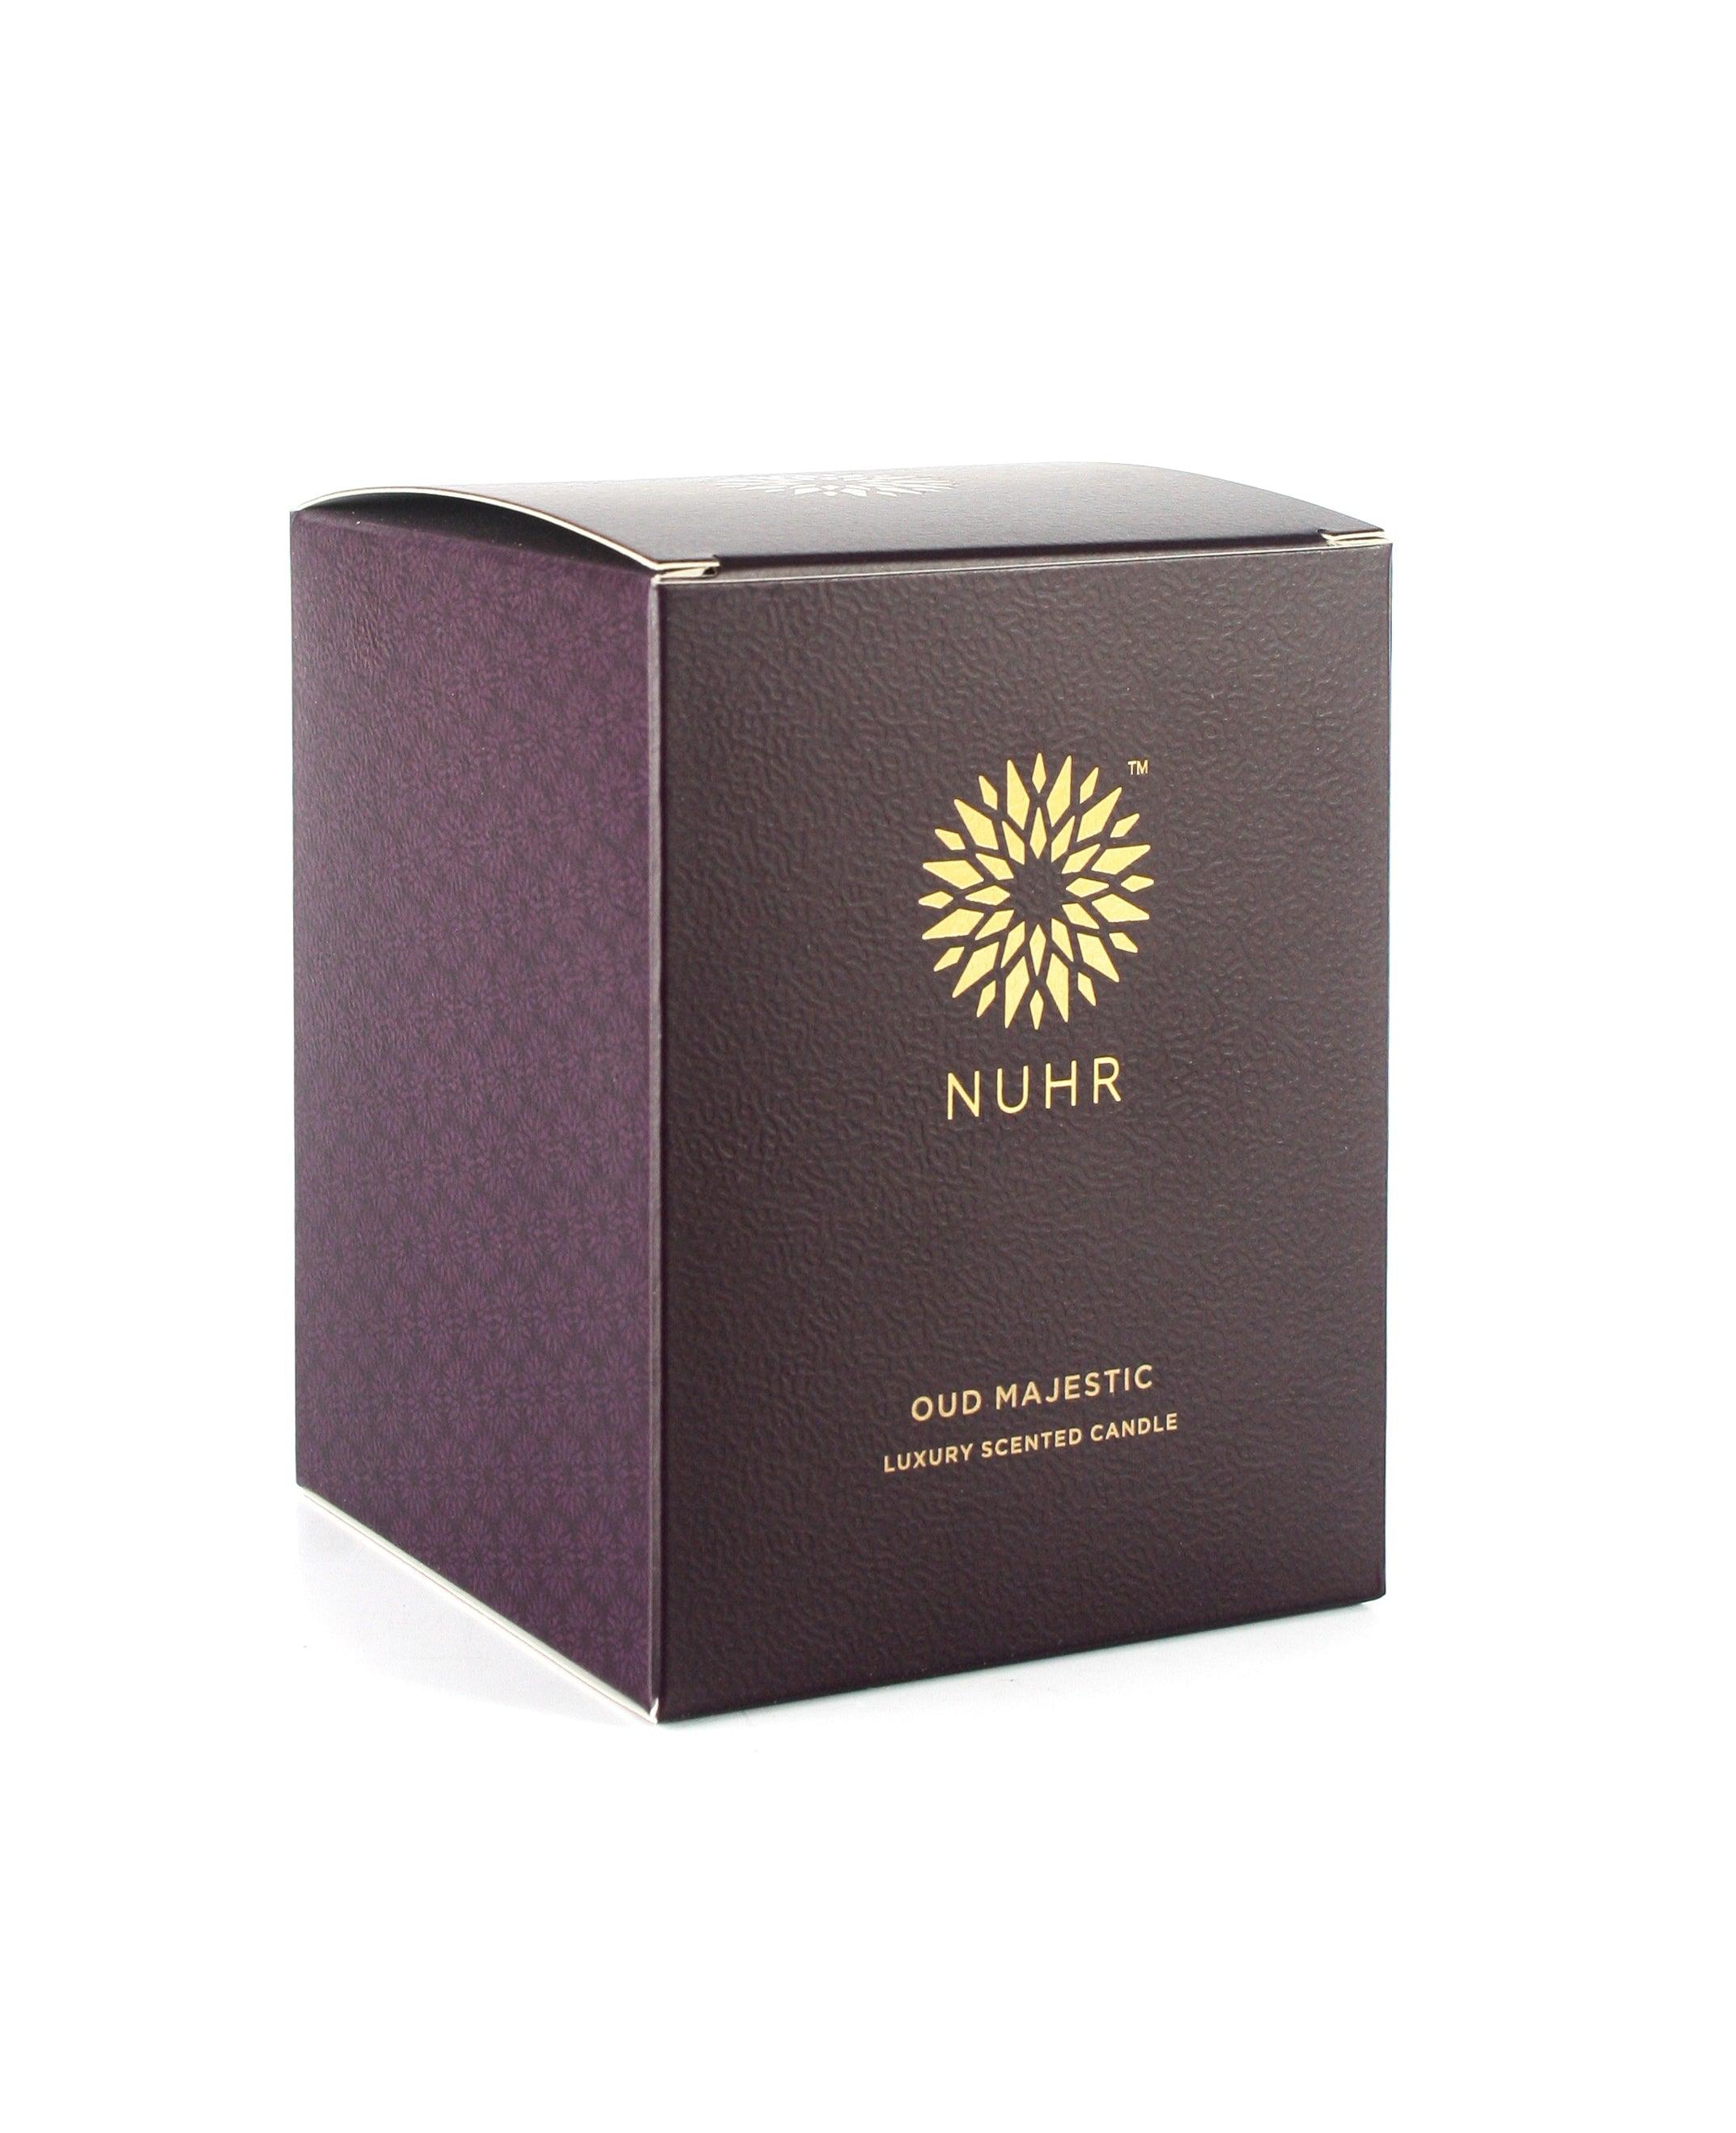 Oud Majestic Luxury Scented Candle - Islamic Pixels